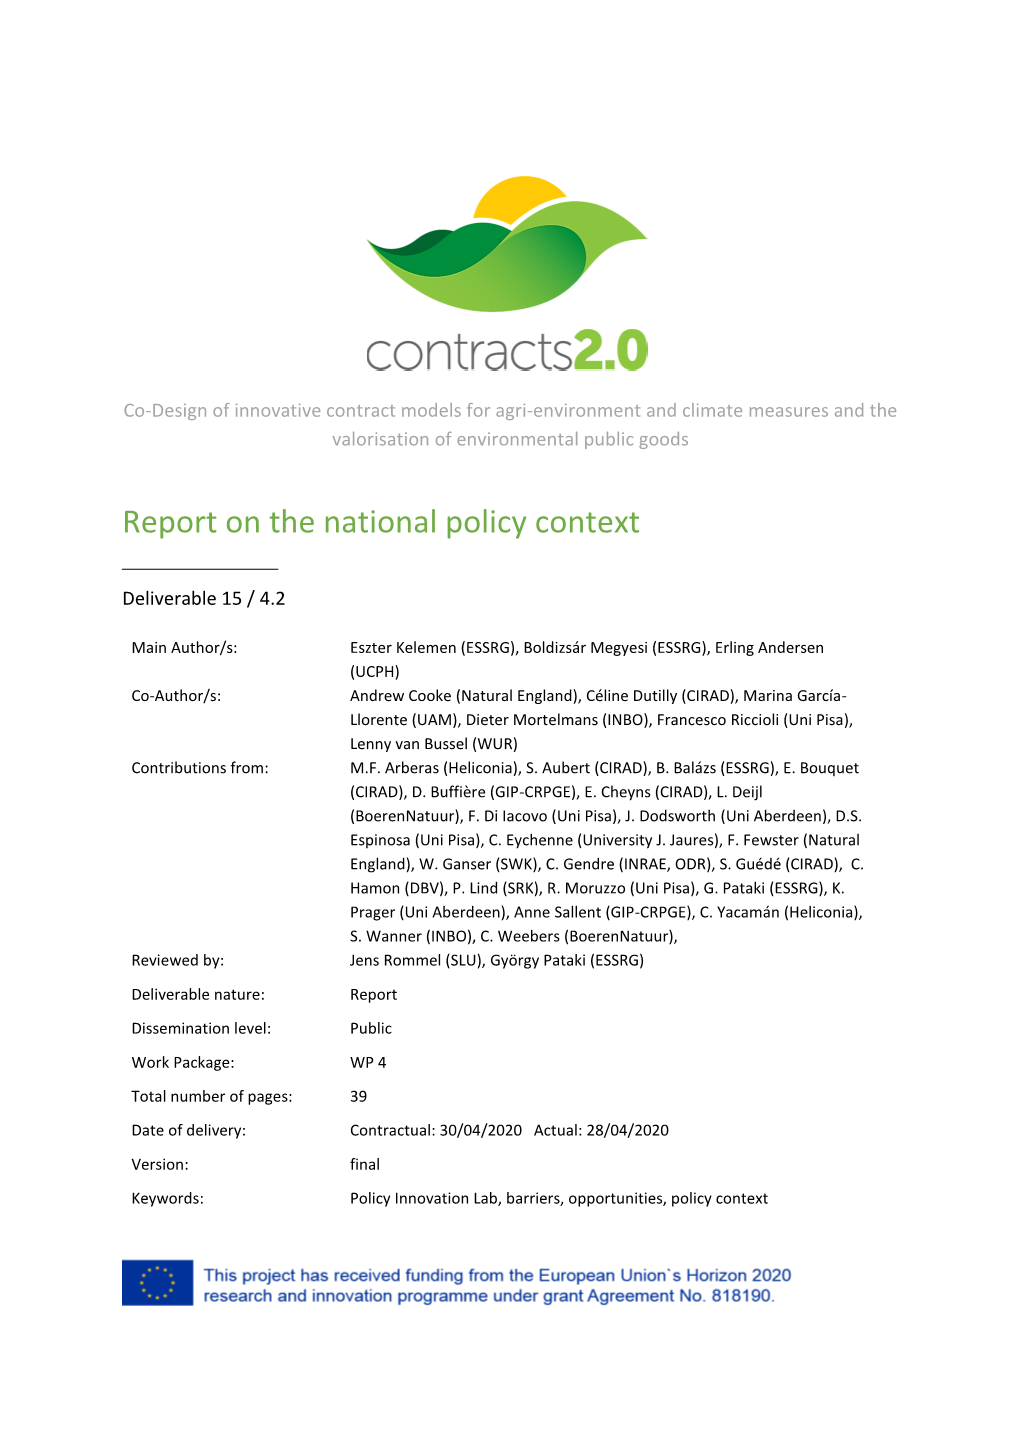 Report on the National Policy Context